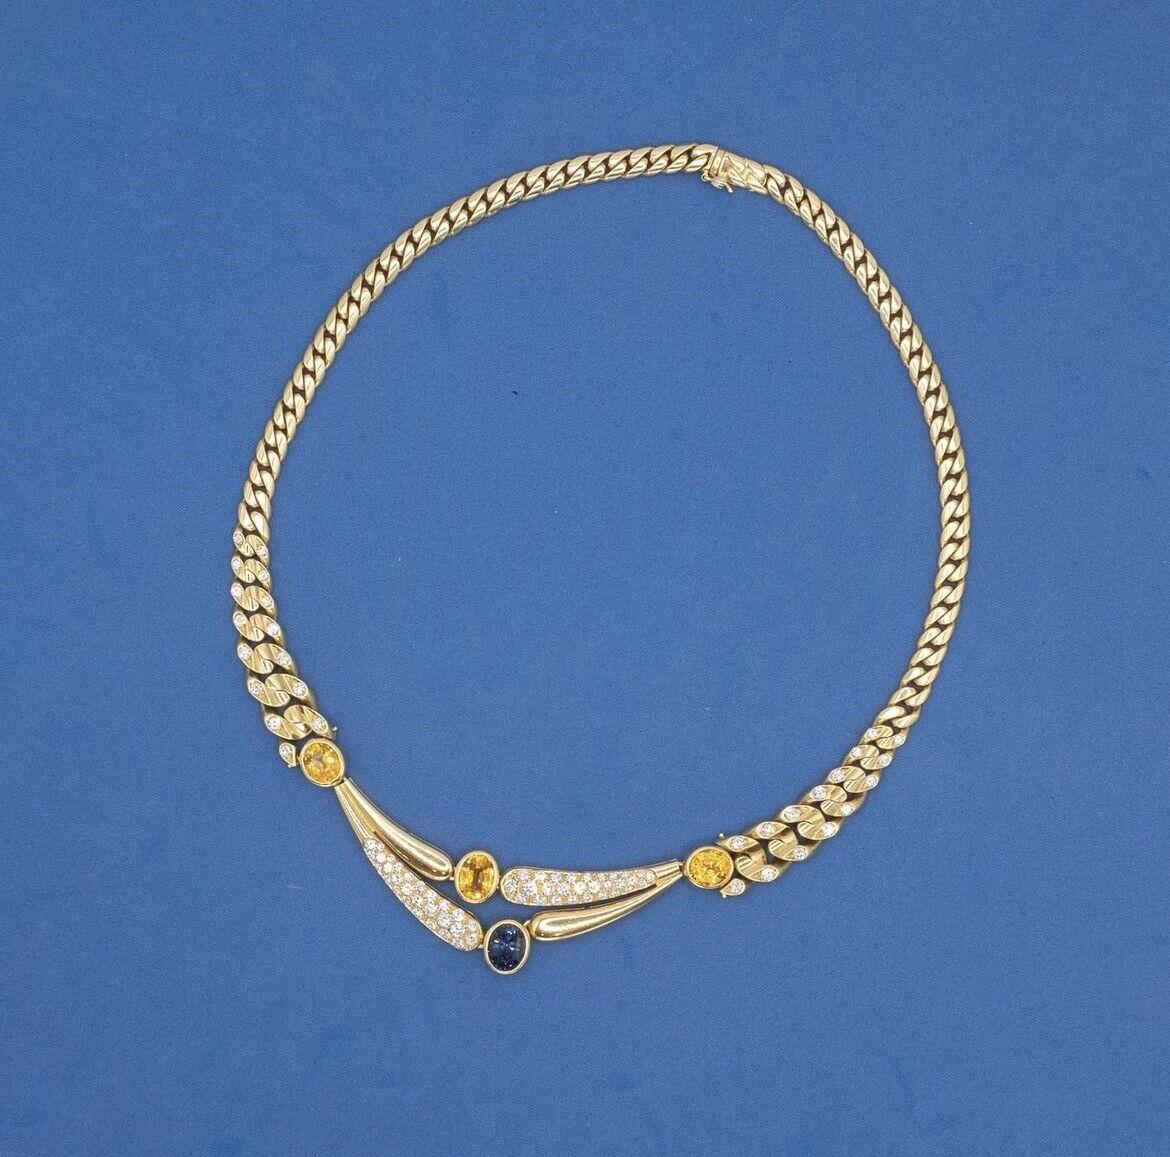 BVLGARI Italy 18k YG, Diamond, Blue & Yellow Sapphire Curb Link Necklace 1970s For Sale 2